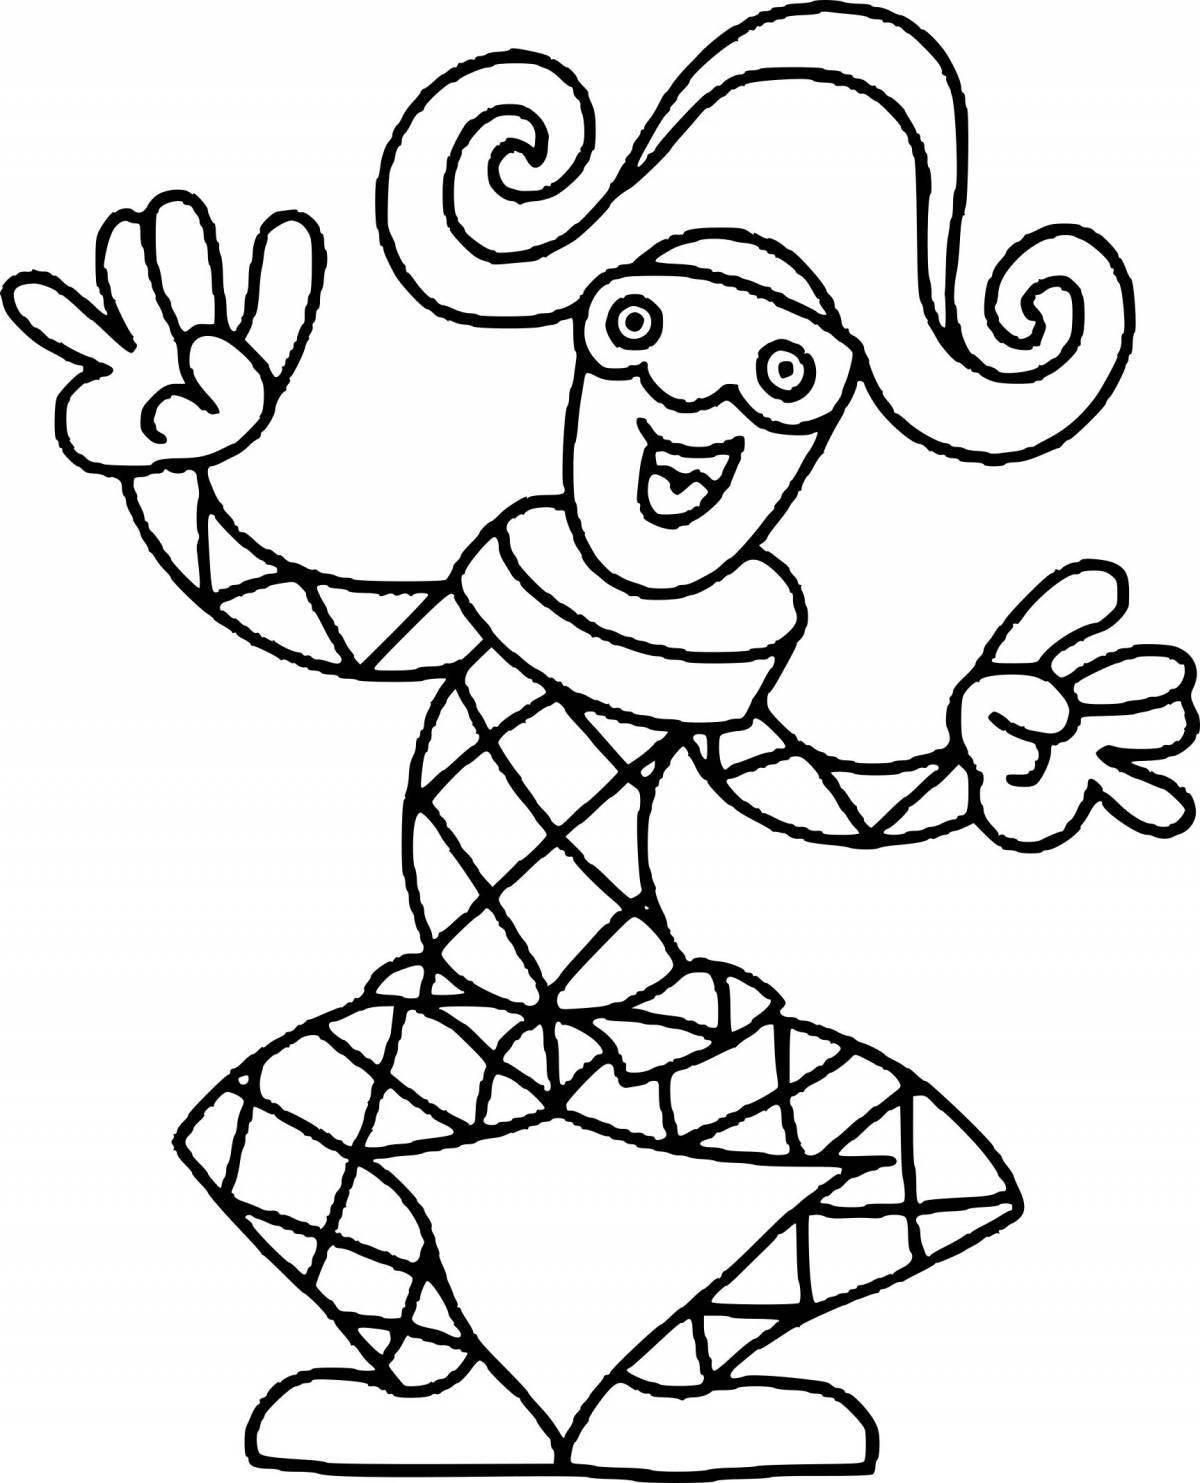 Innovative parsley character coloring page